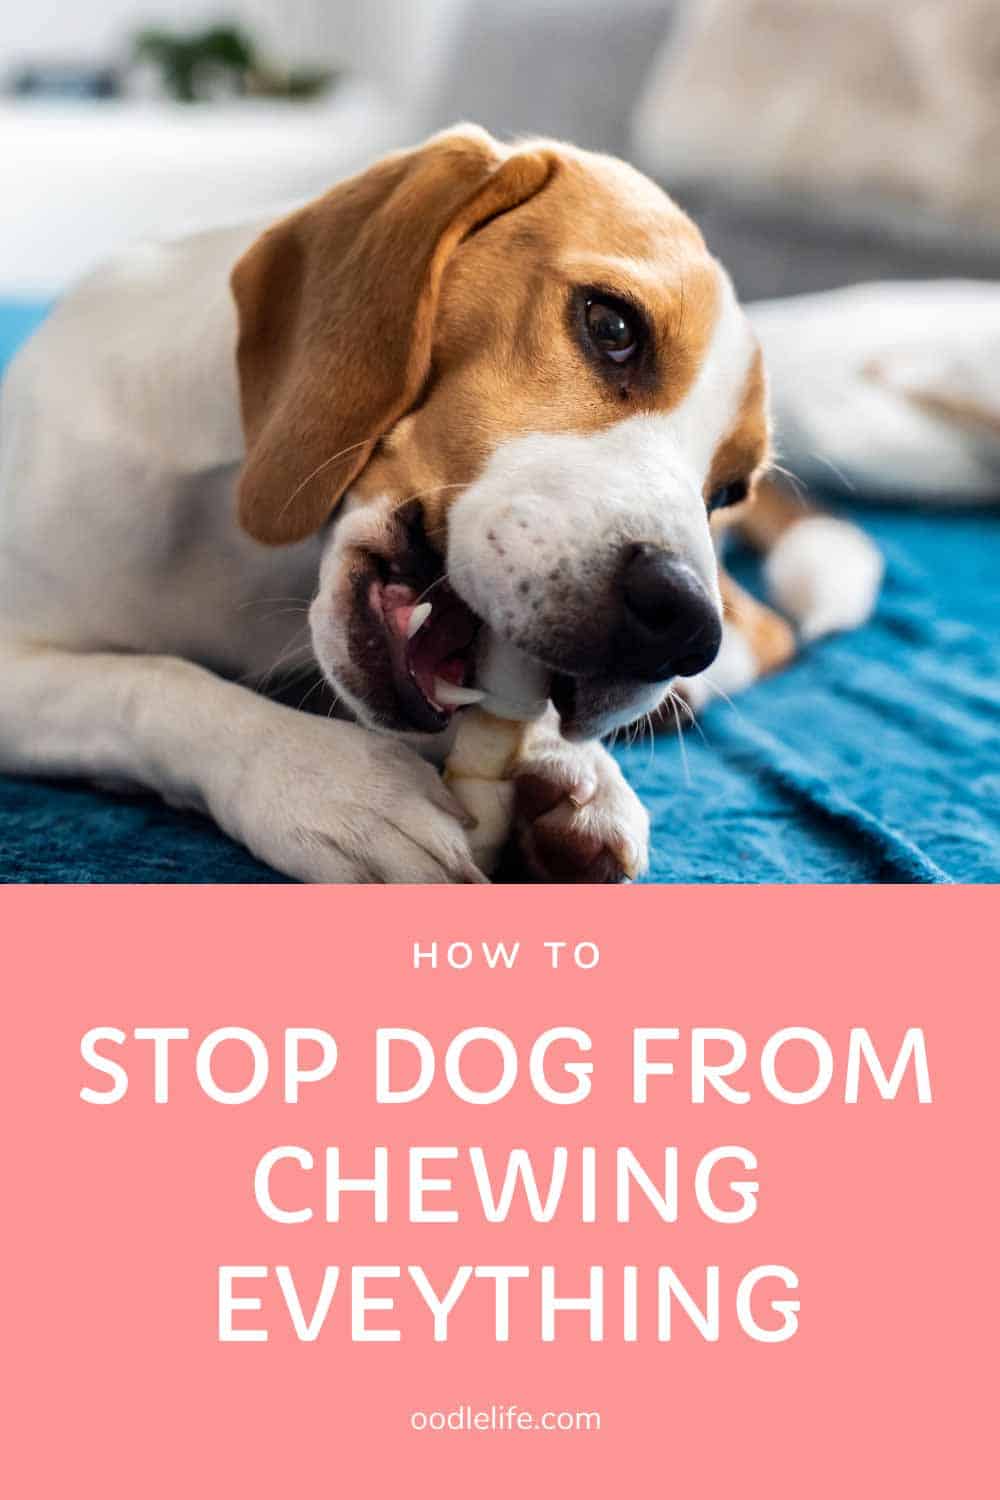 How Do I Get My Dog to Stop Chewing and Eating Everything